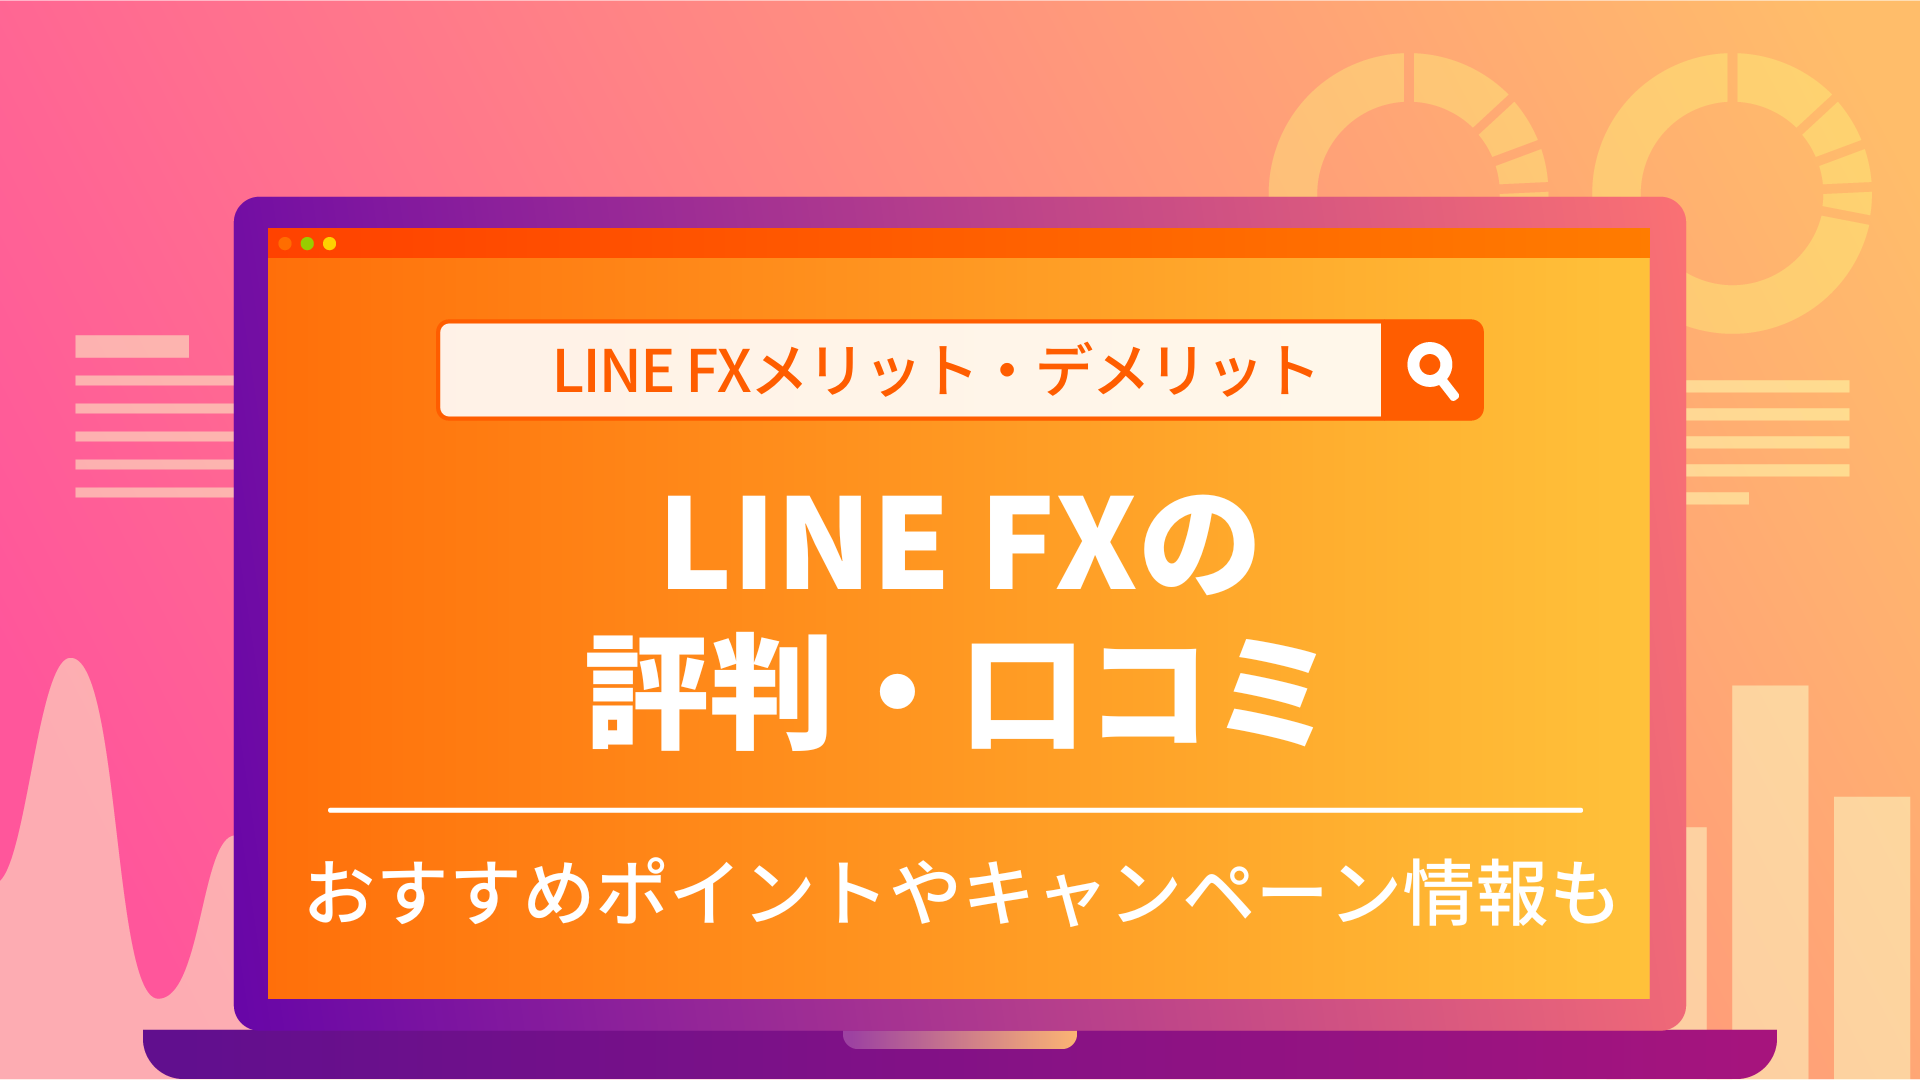 LINE FXの評判・口コミは？メリット・デメリットを詳しく紹介します